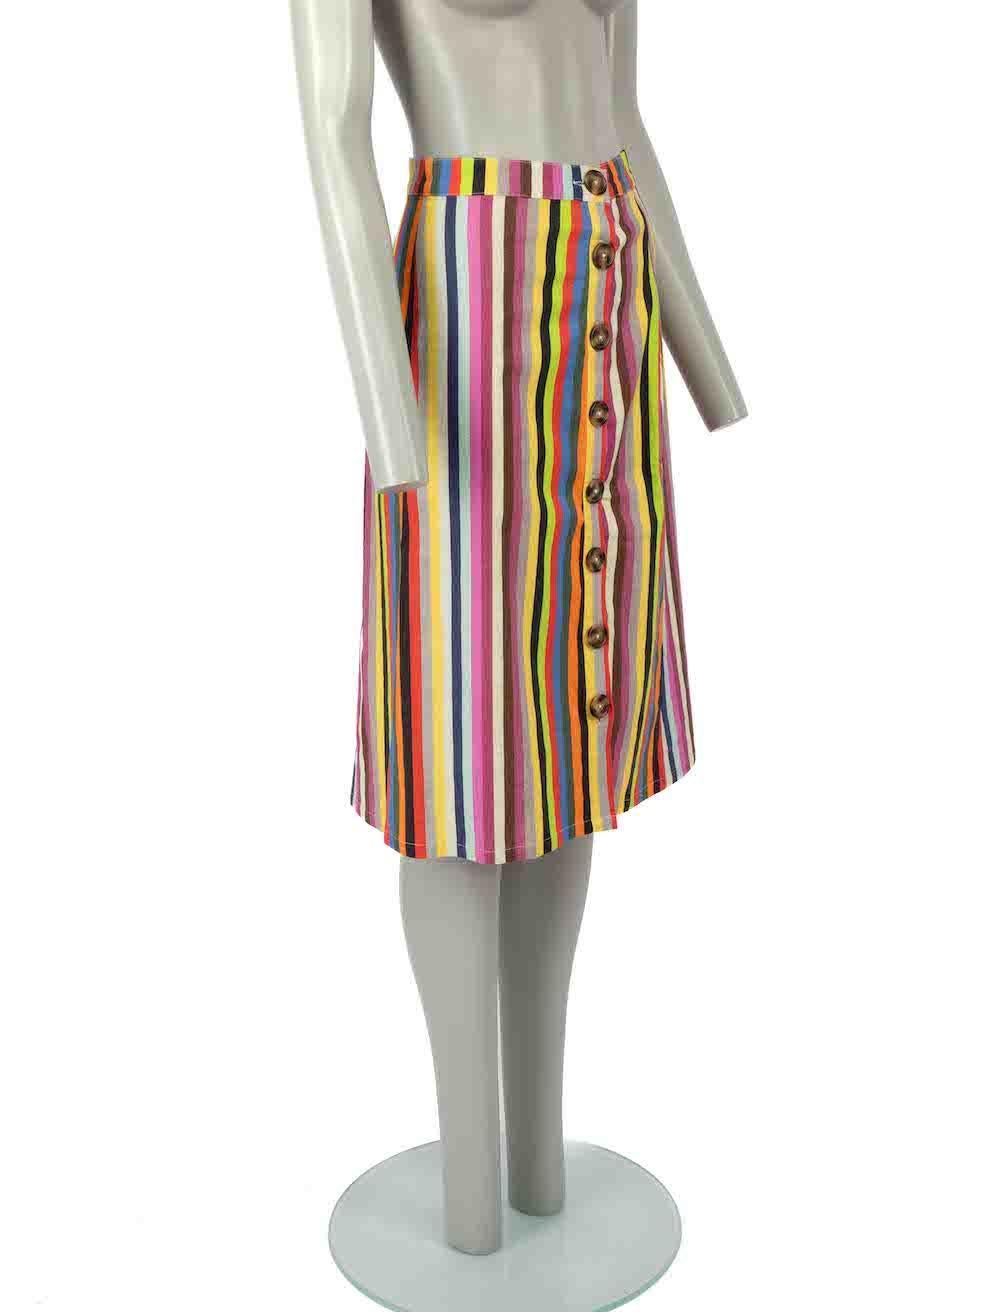 CONDITION is Very good. Minimal wear to skirt is evident. Very light pilling and a single pluck to the stitching can be seen on this LPA designer resale item.
 
 Details
 Multicolour
 Linen
 Skirt
 Striped pattern
 Midi
 Button up fastening
 
 
